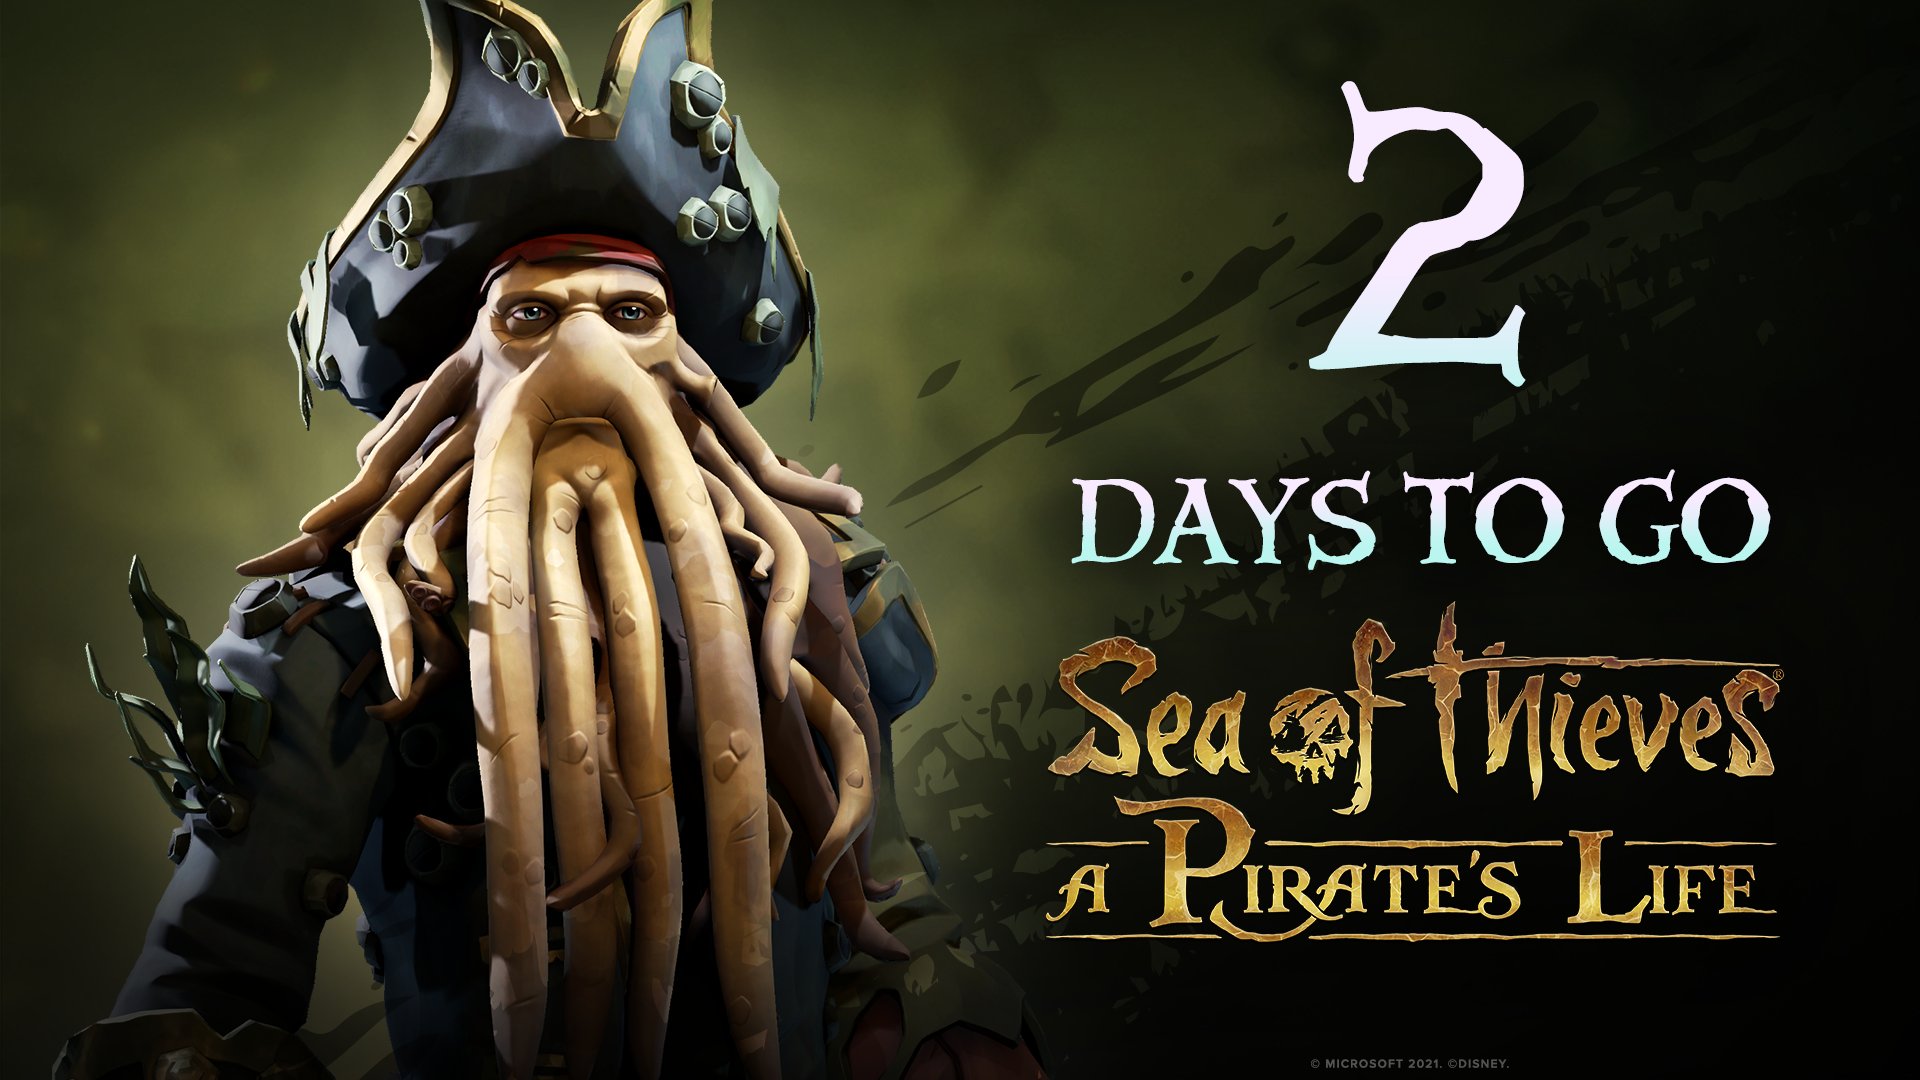 Sea of Thieves on X: Davy Jones wants every pirate to fear death, and in  two days it's up to you to make sure he doesn't put you in that spot,  pirates!